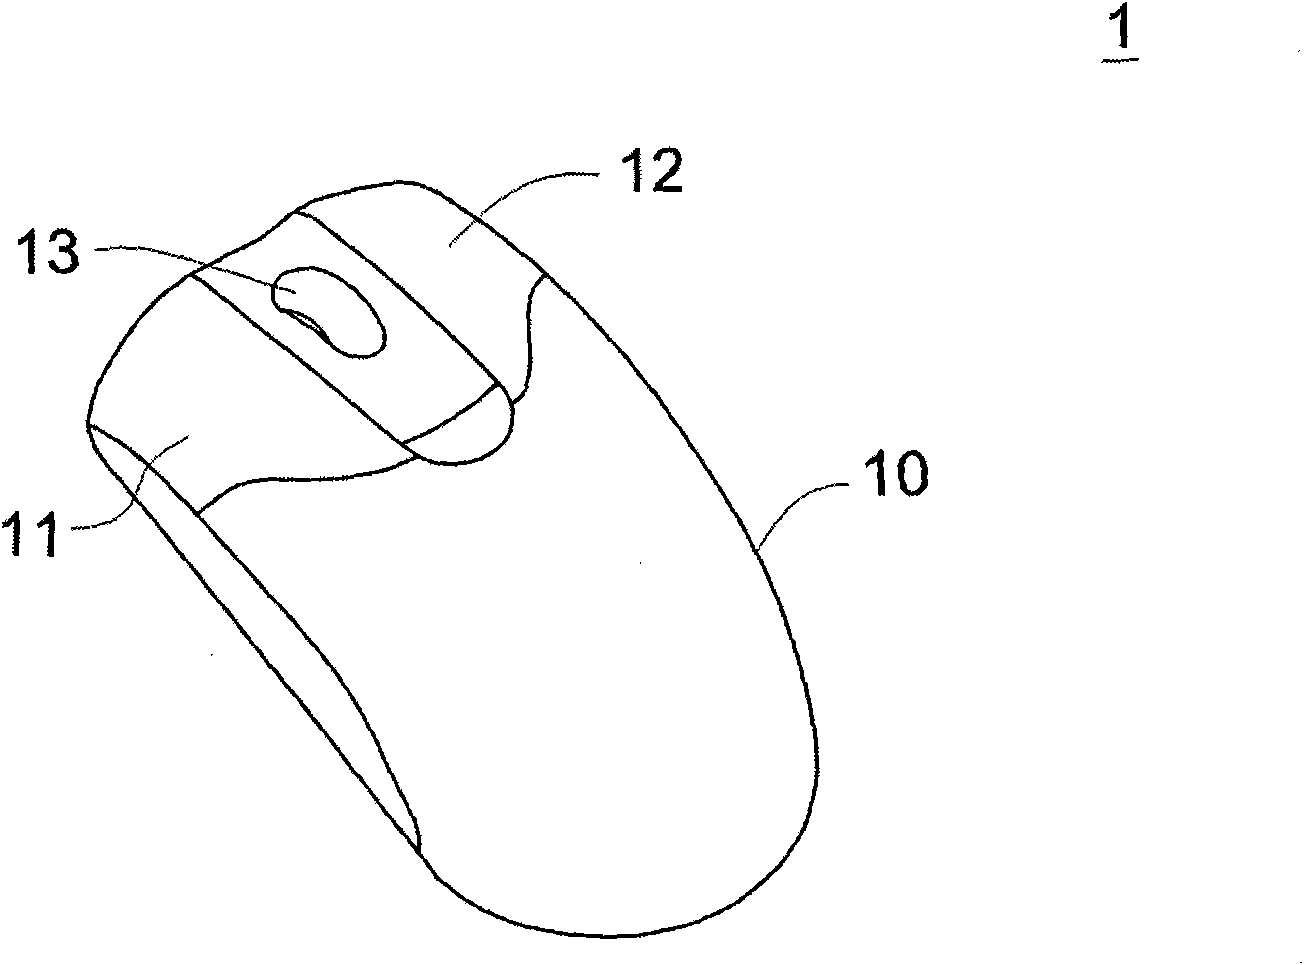 Variable-size multi-mode mouse